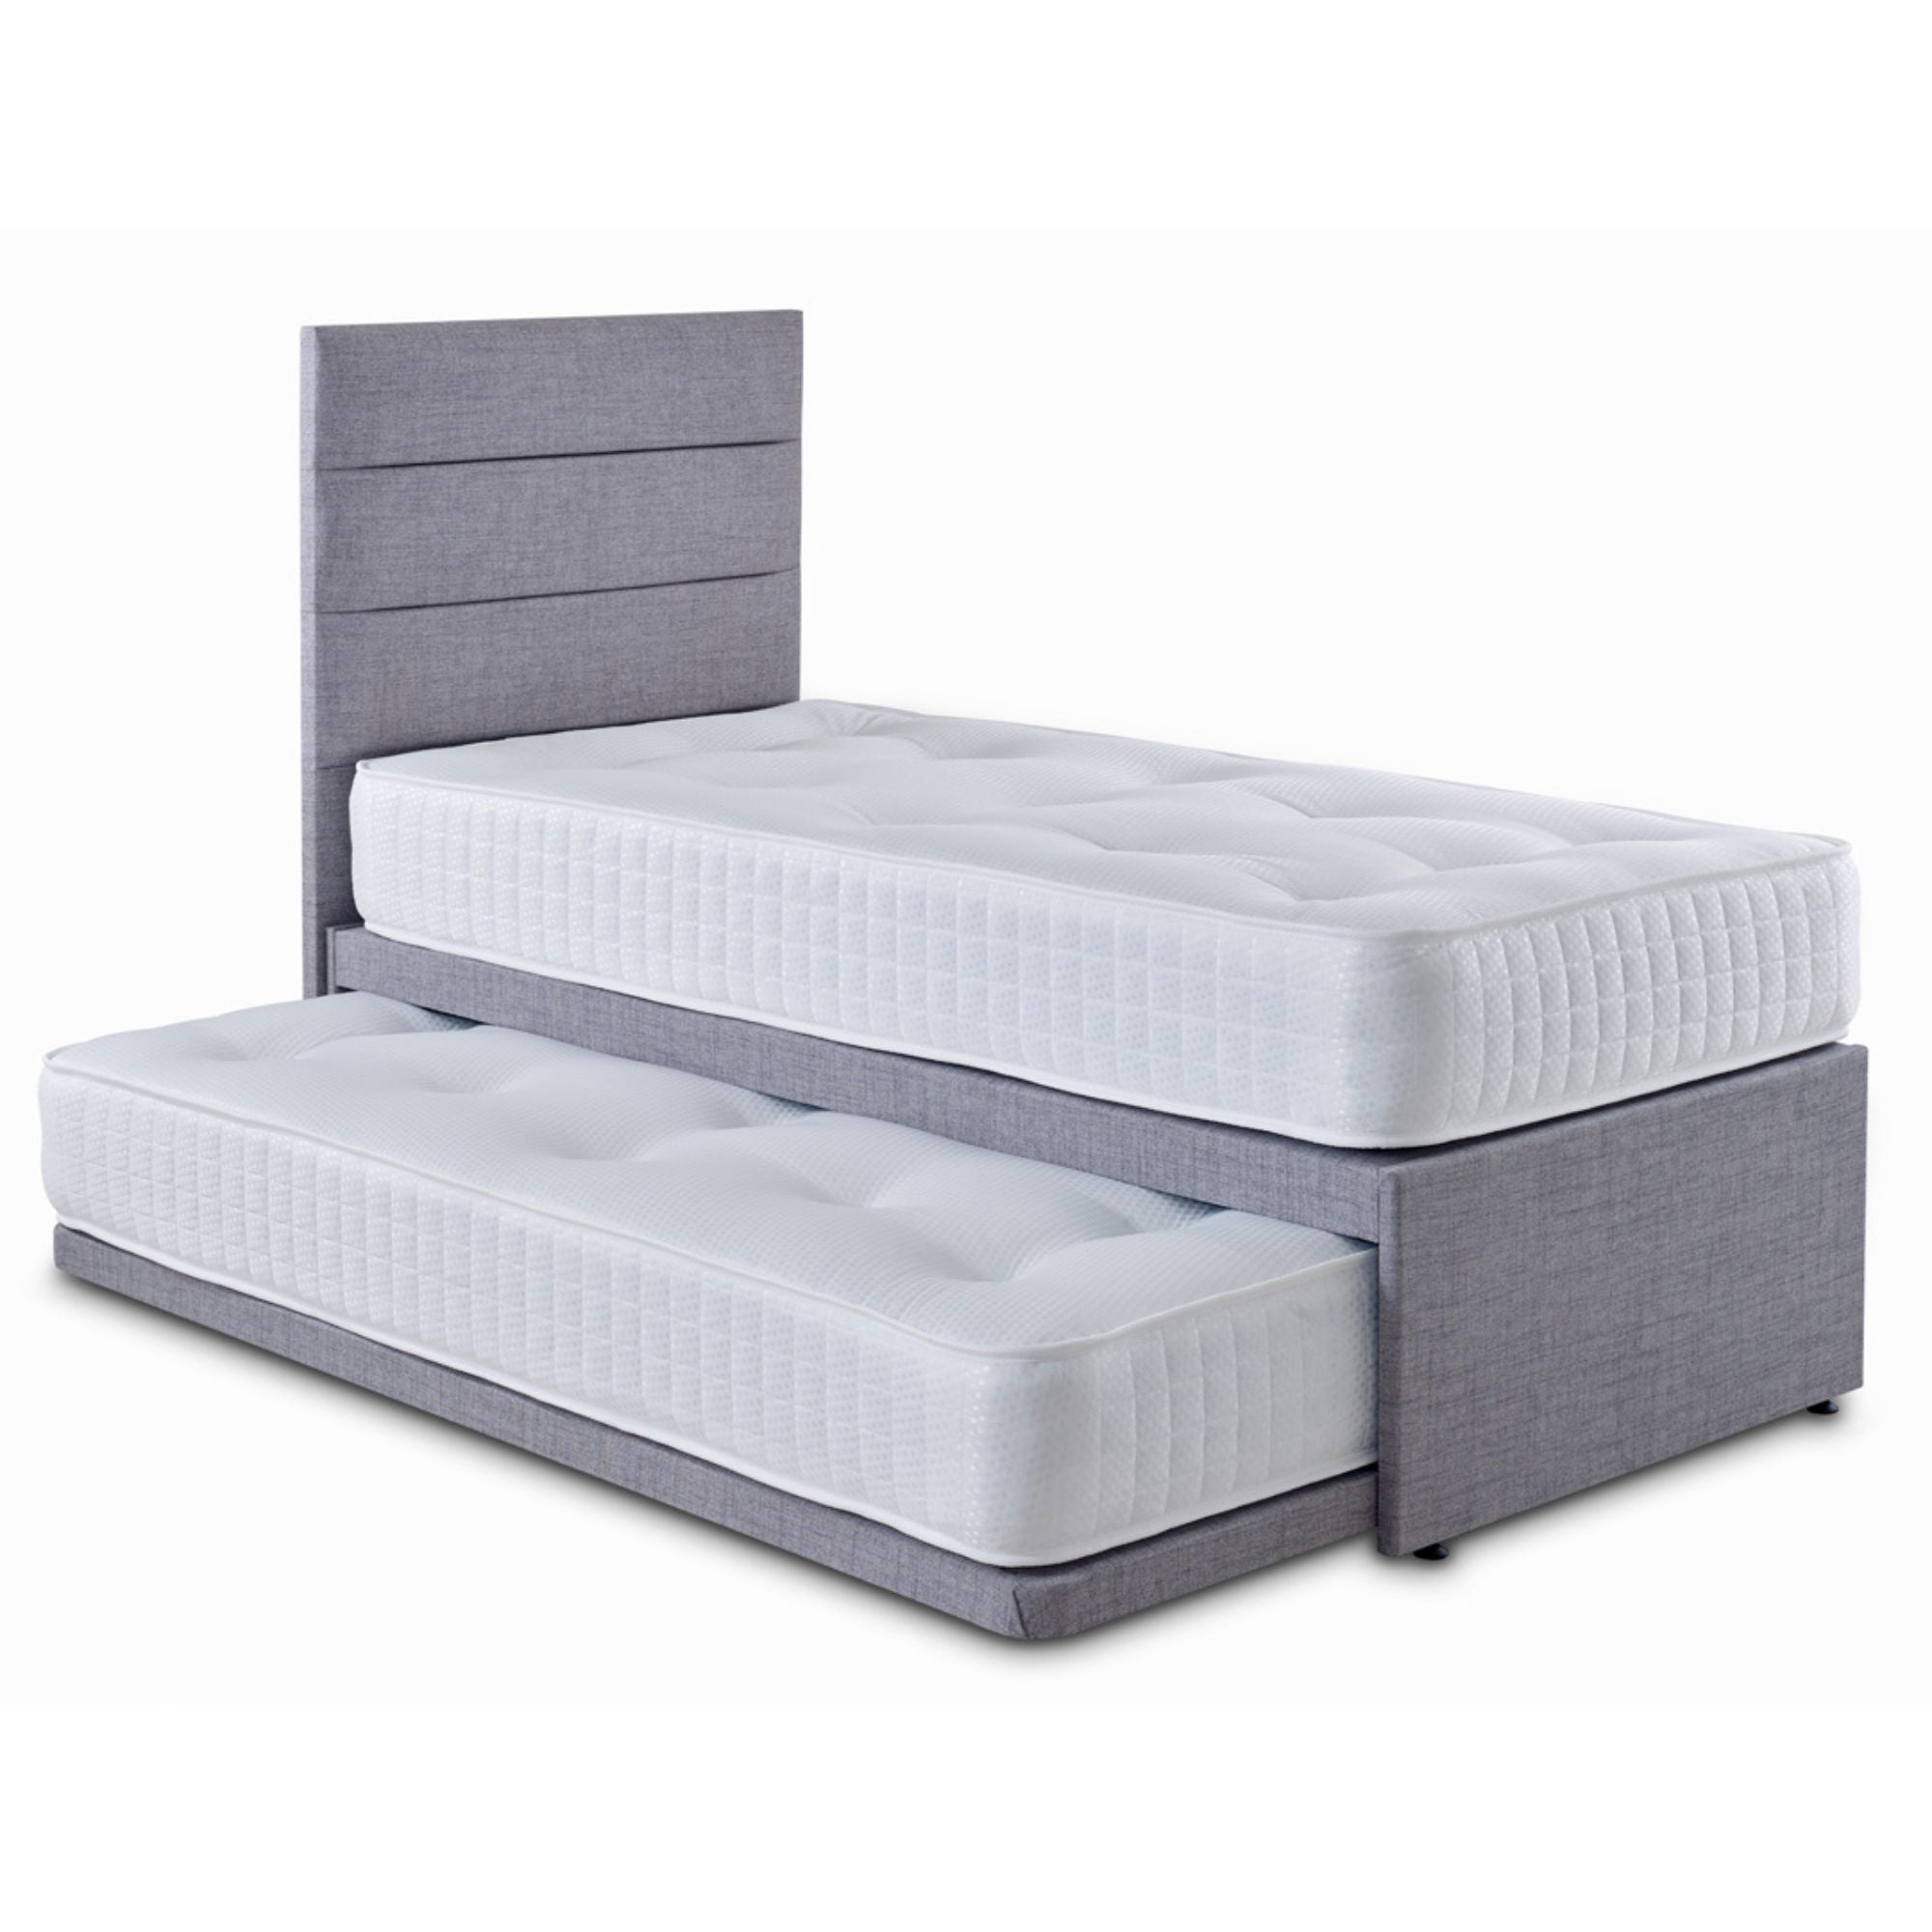 Bed Kings Guest Bed CLEARANCE Luxury Guest Bed With 2 Mattresses & Headboard Bed Kings